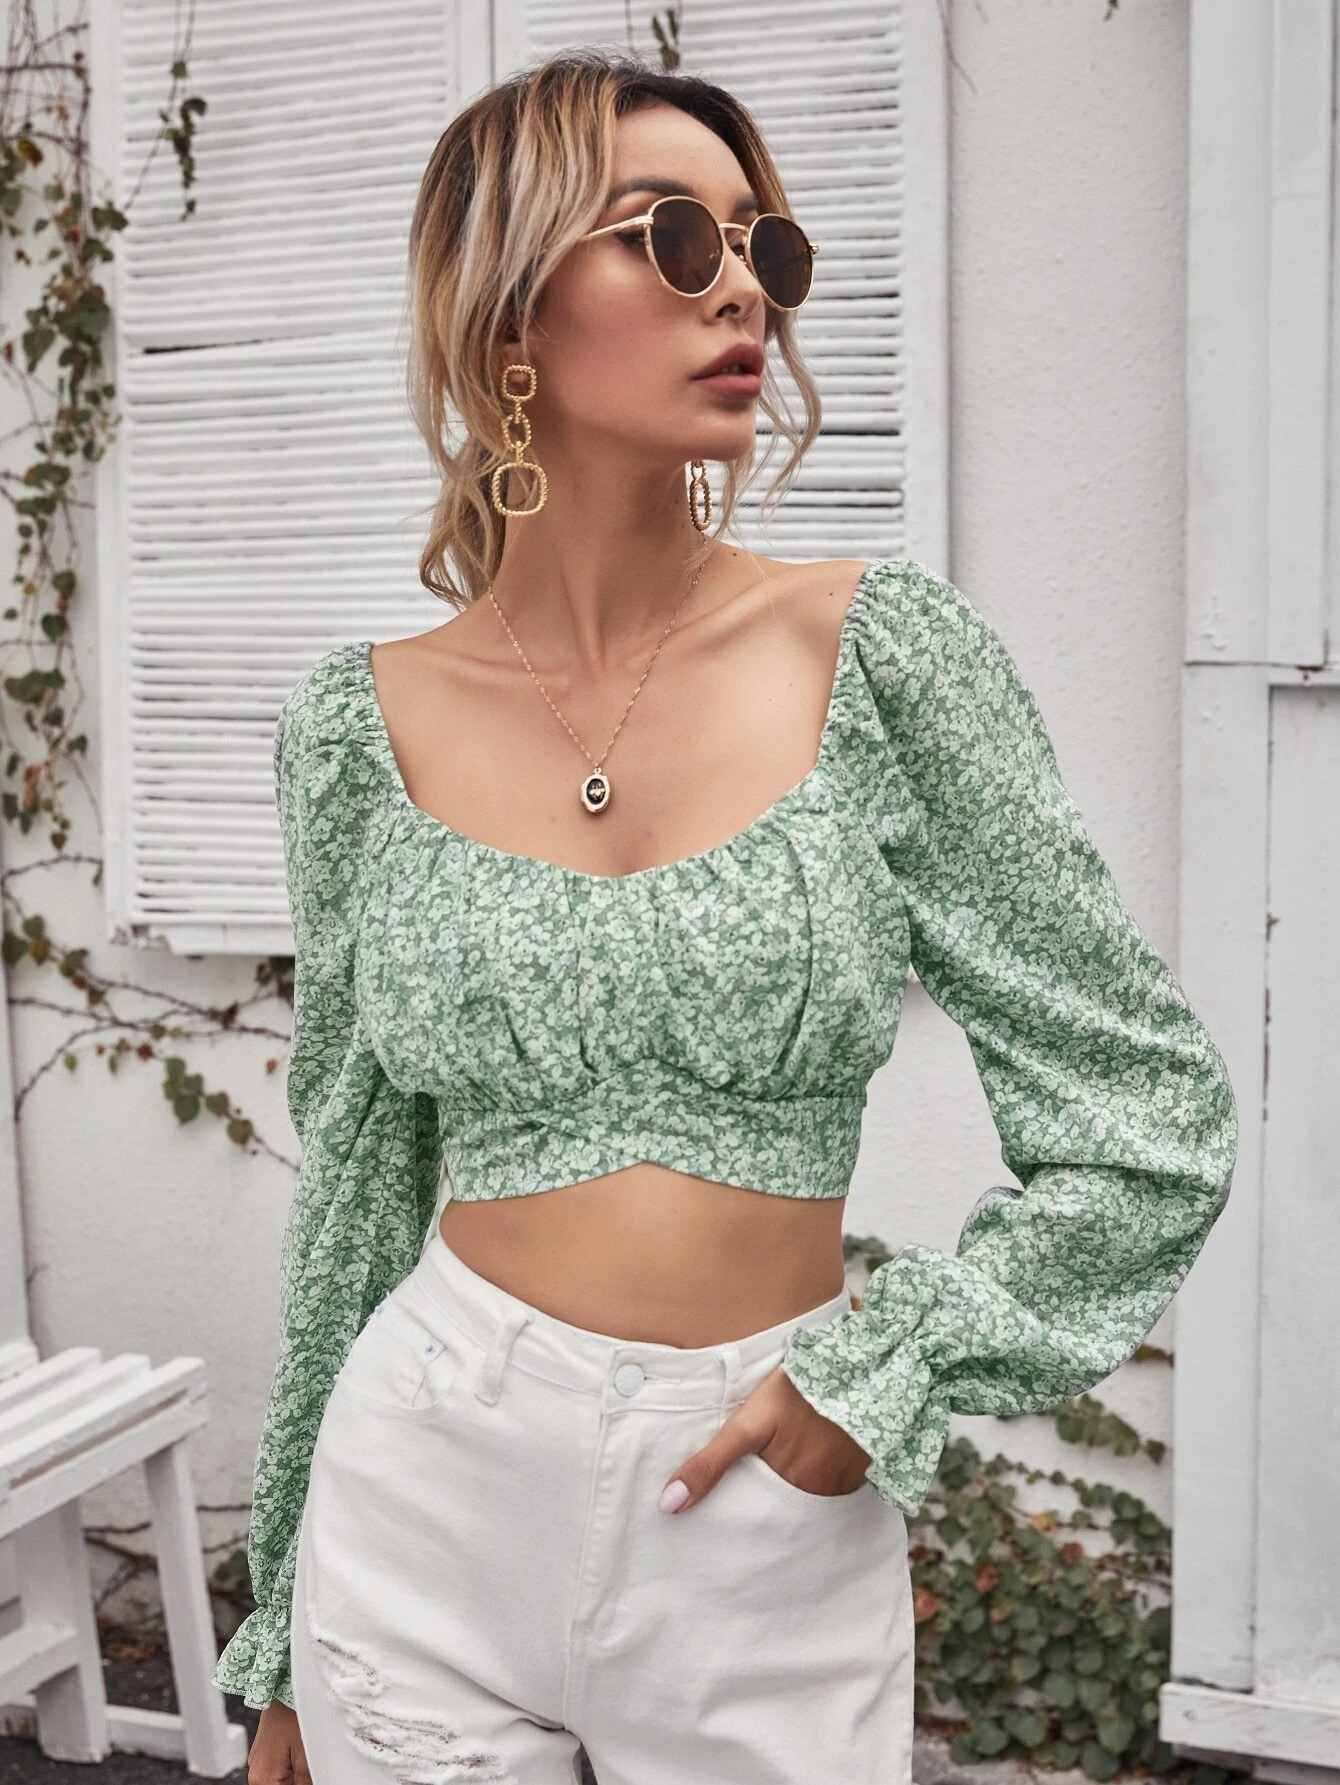 Women's Clothing Tops | Women Crop Top Green Polyester Long Sleeves Casual Tops - VZ41253